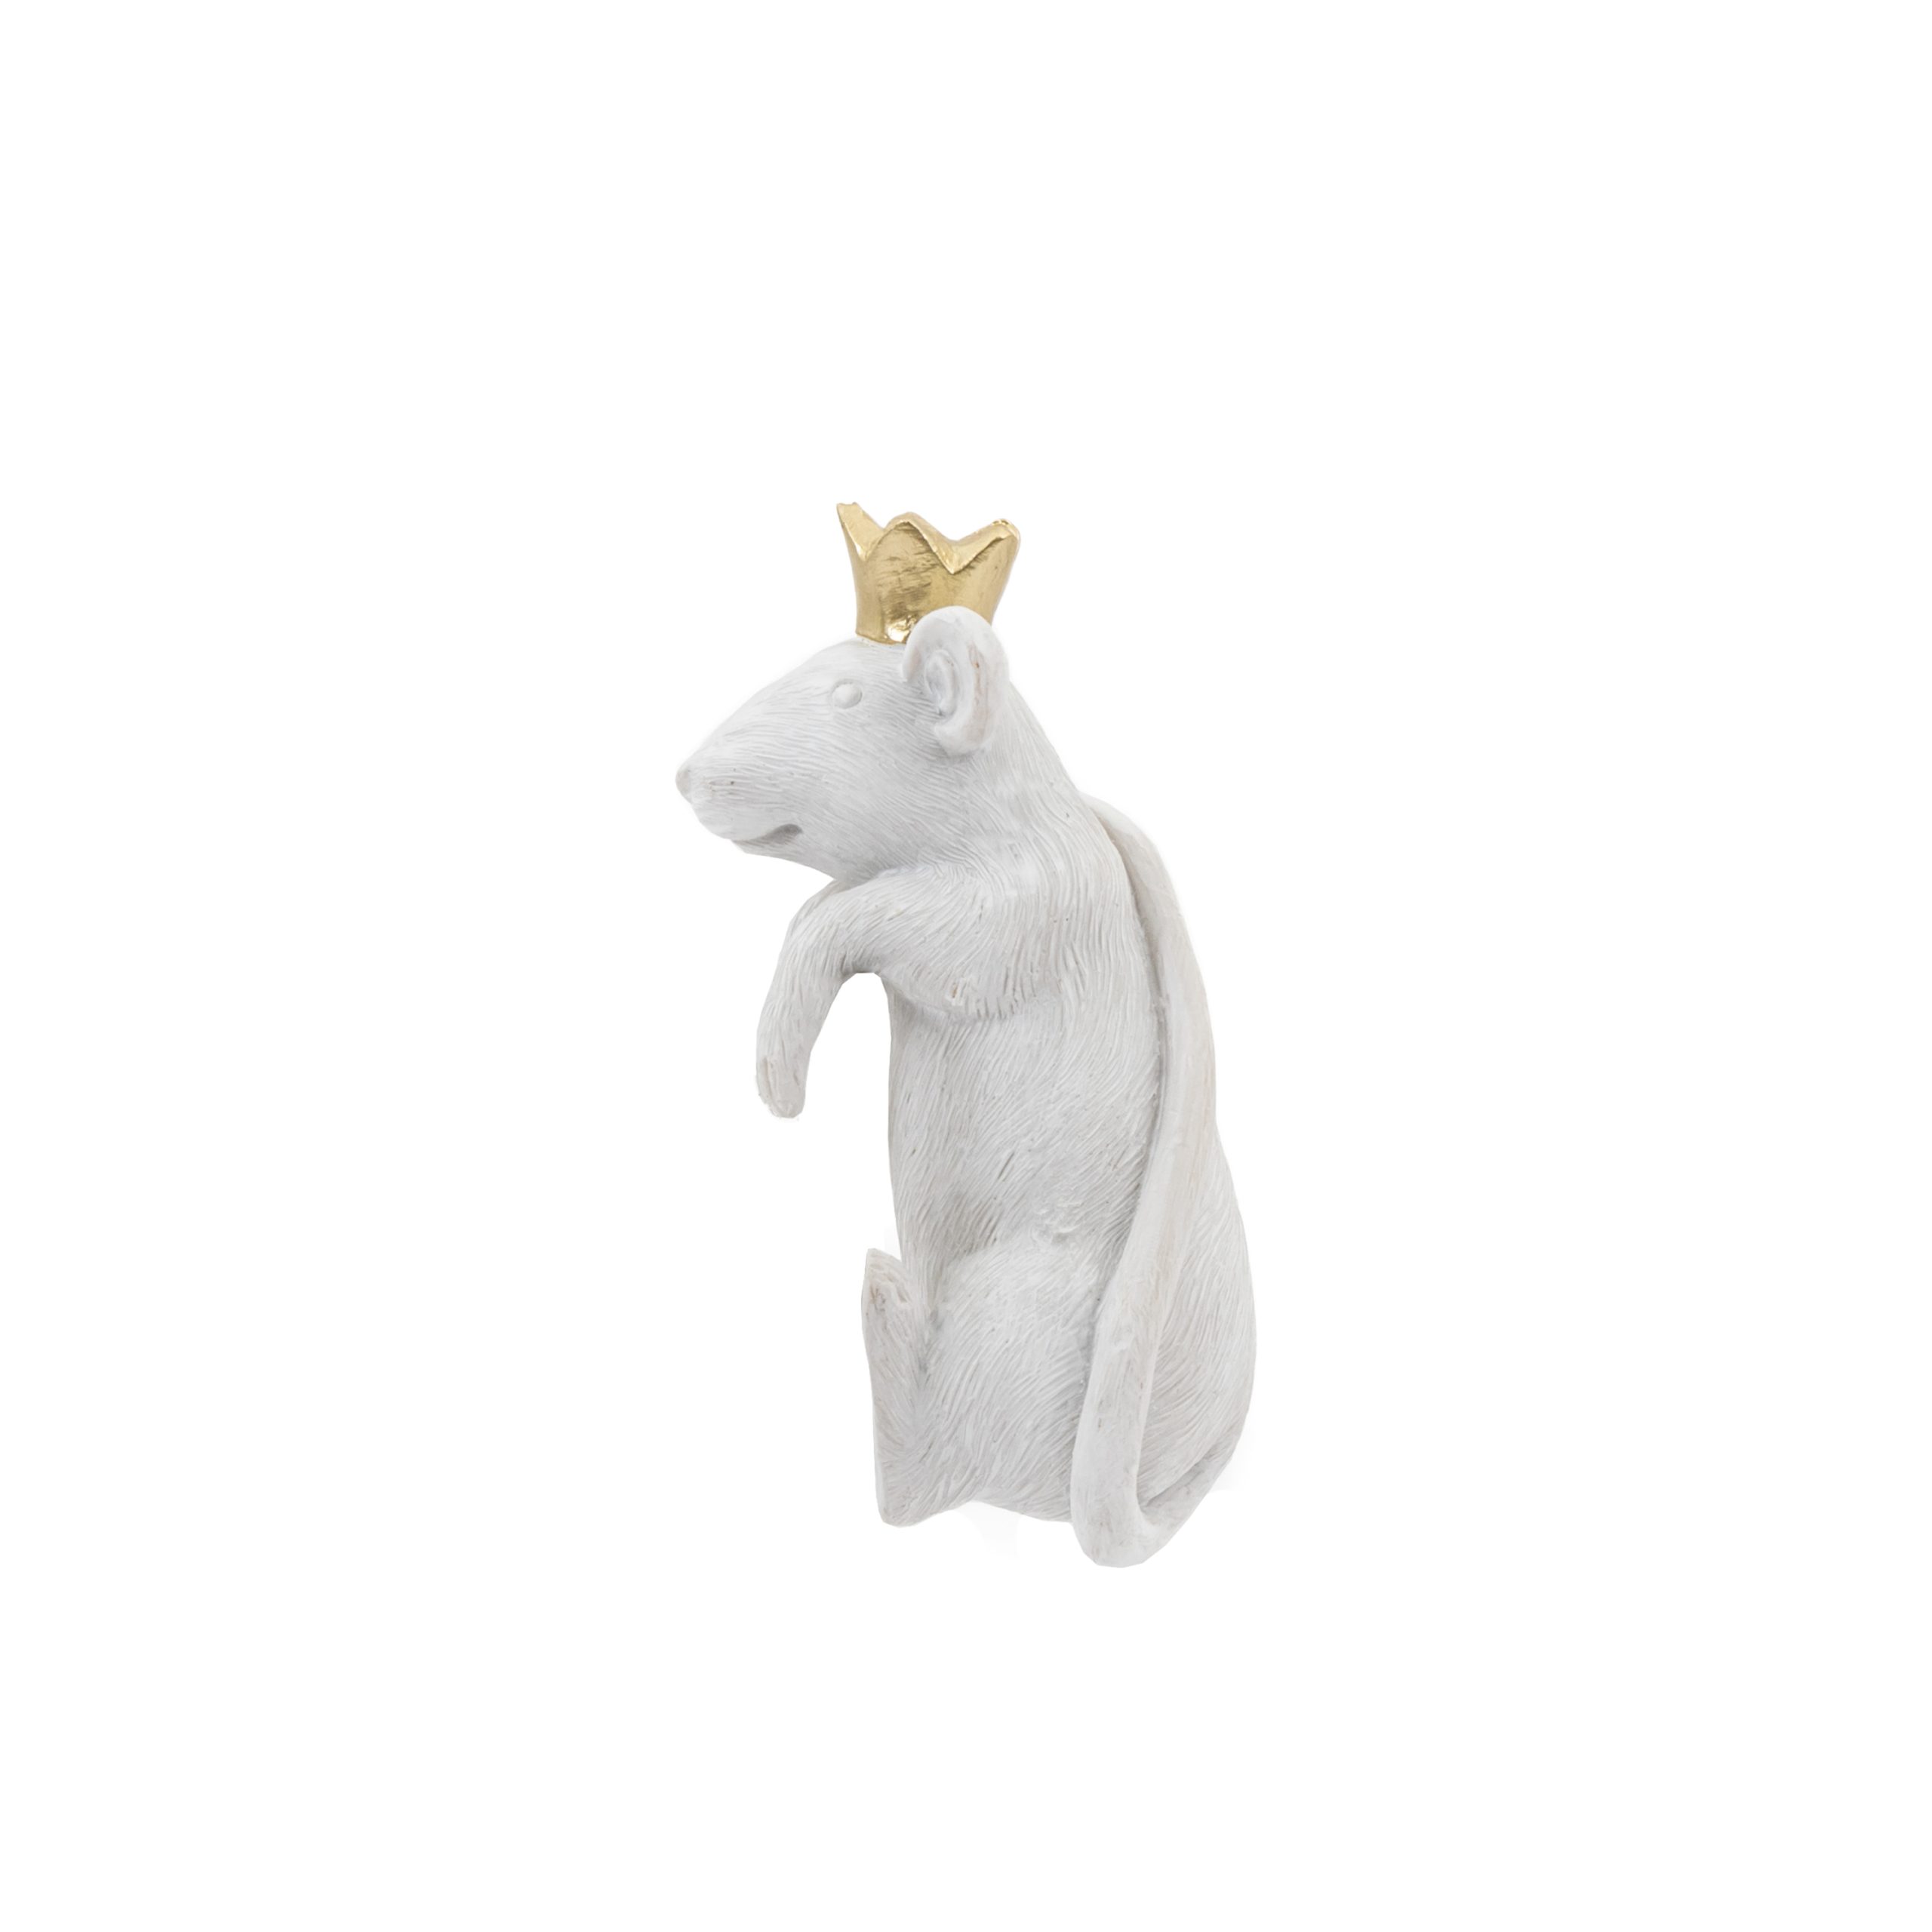 Gallery Direct Mouse King Pot Hanger White/Gold (Pack of 2)